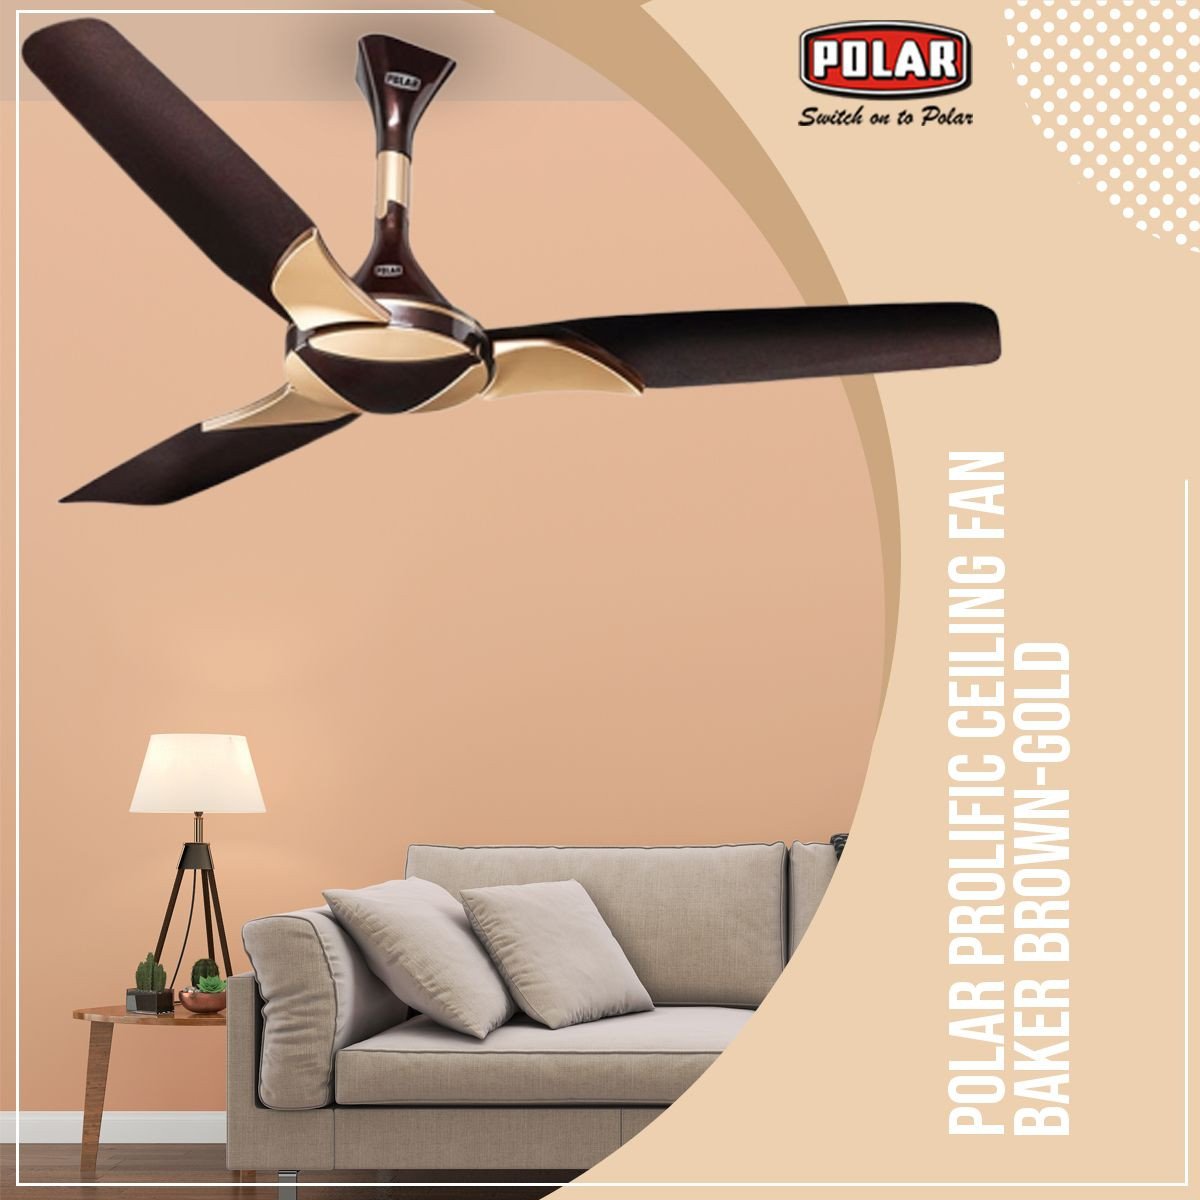 Modern Bedroom Ceiling Fan Fresh Polar Brings to You Ceiling Fan with the Innovative and